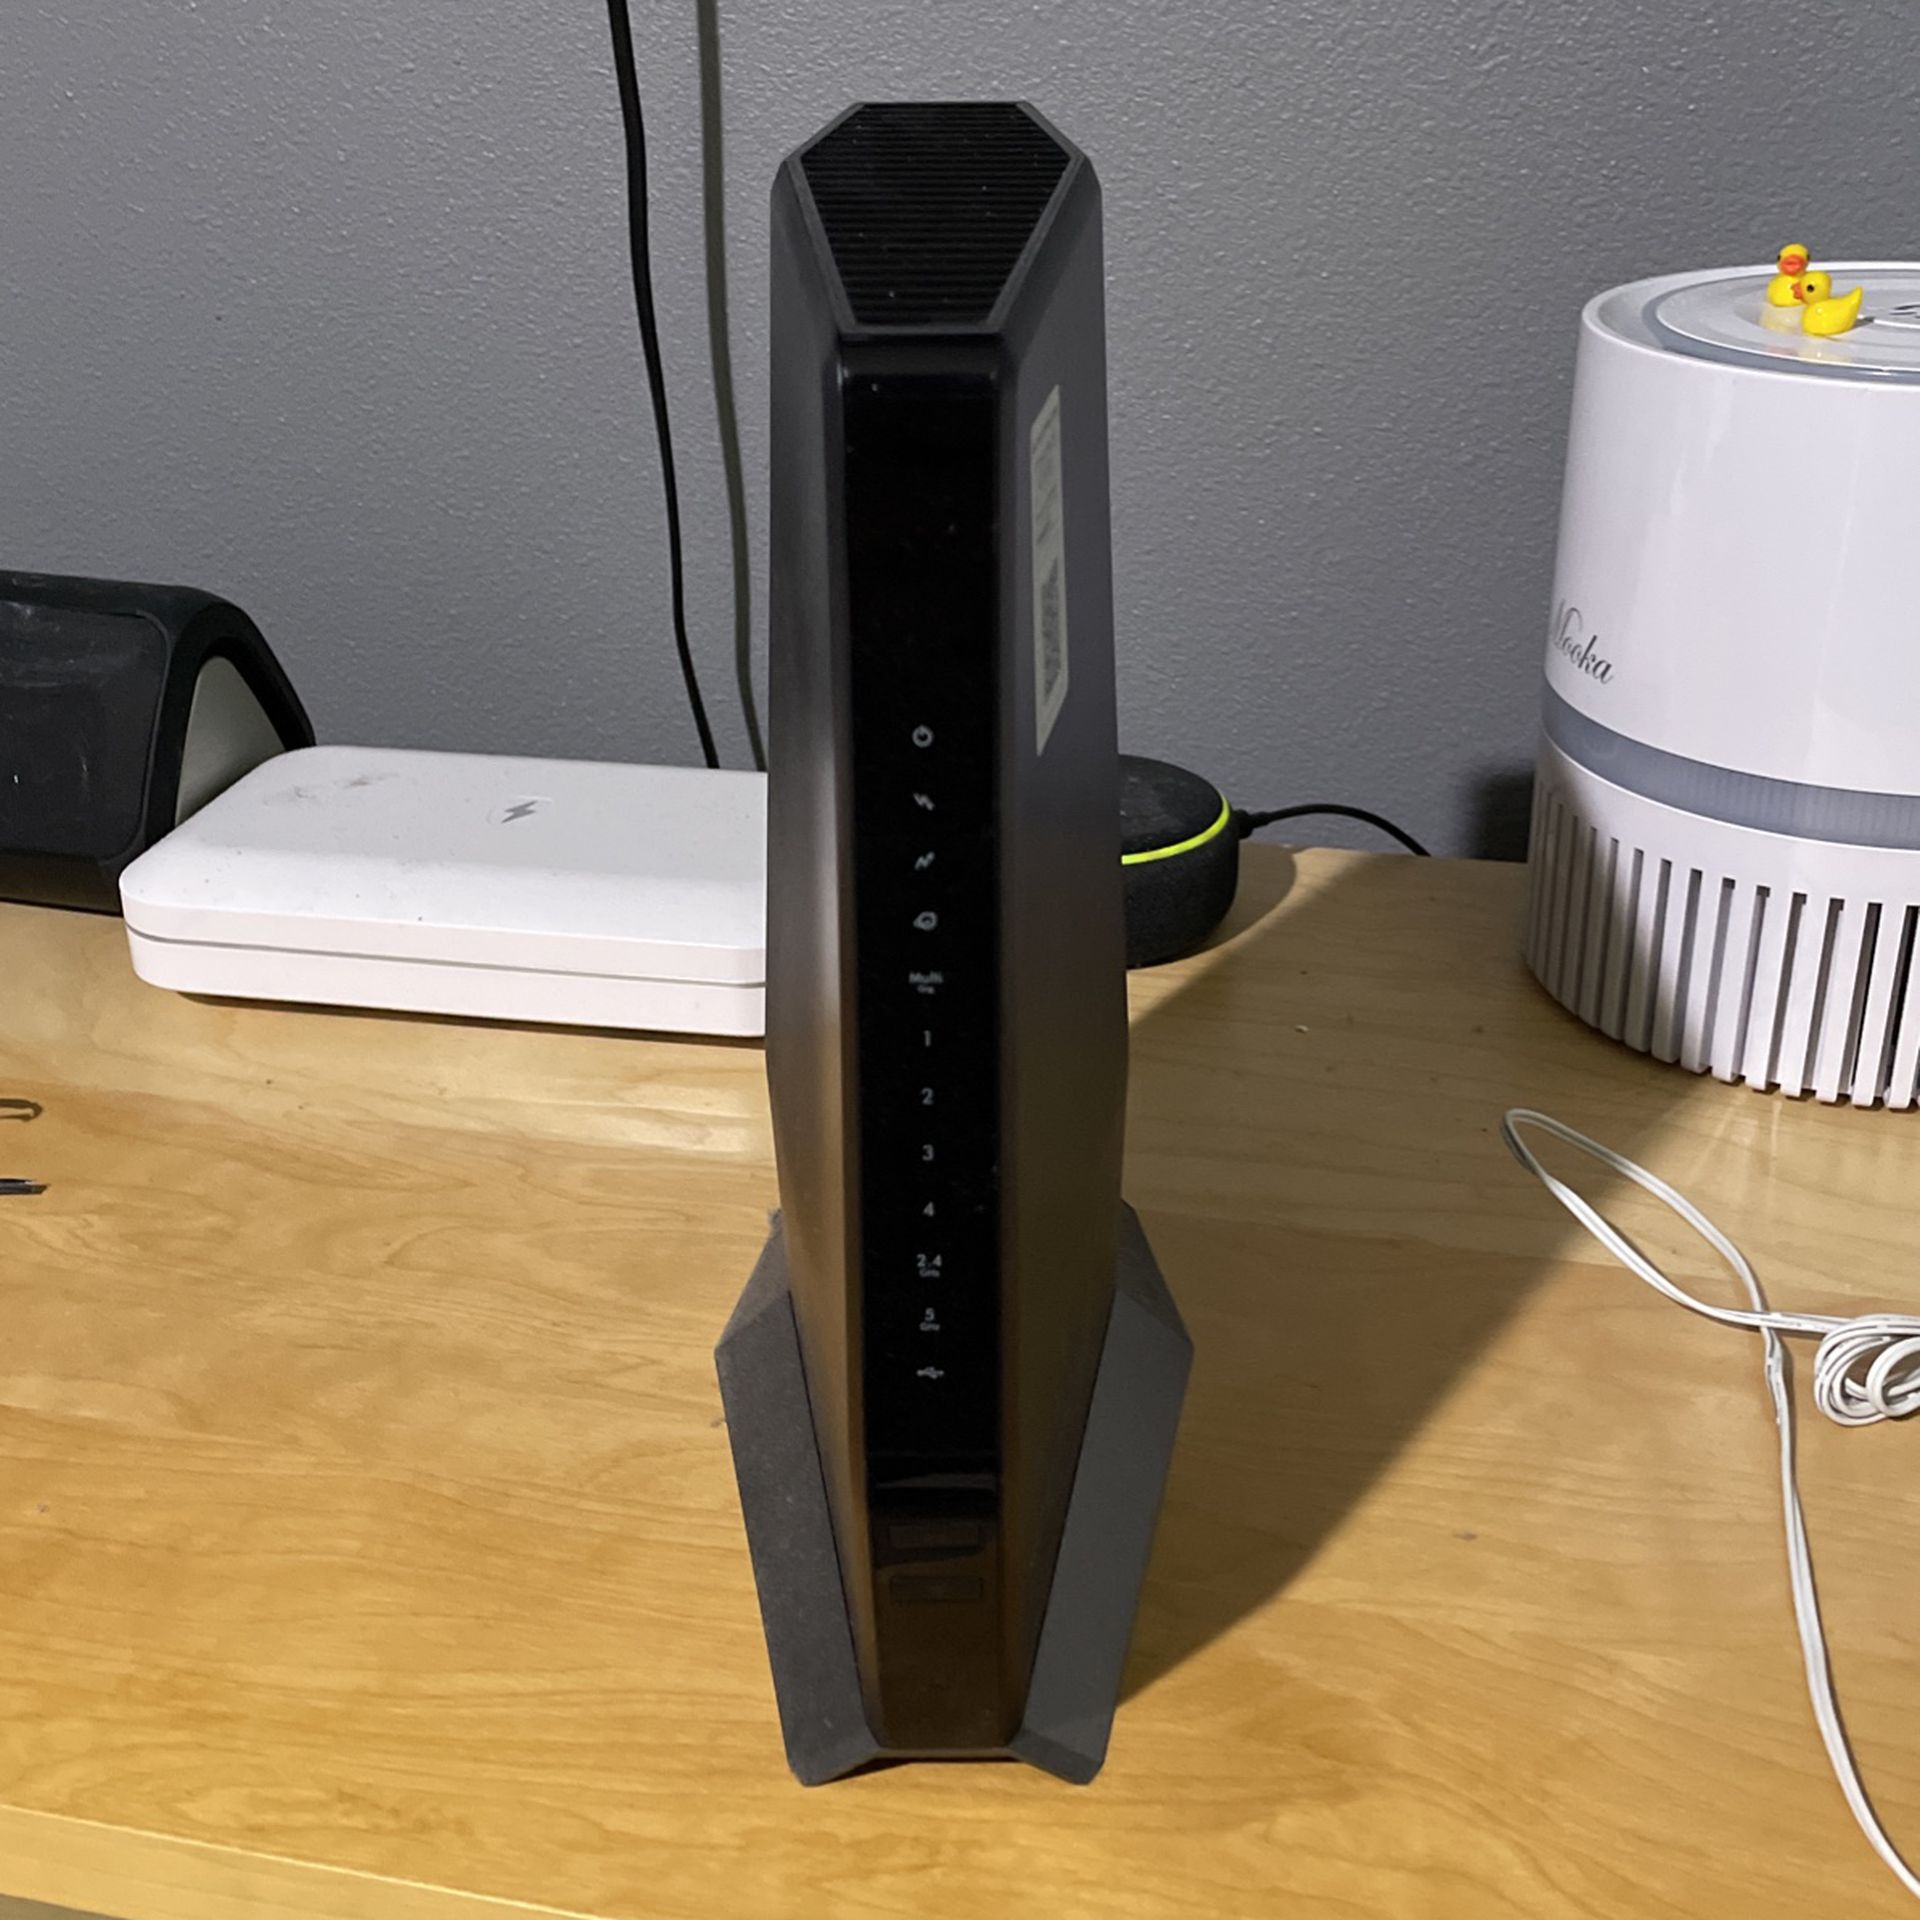 Nighthawk CAX80 Router + Cable modem